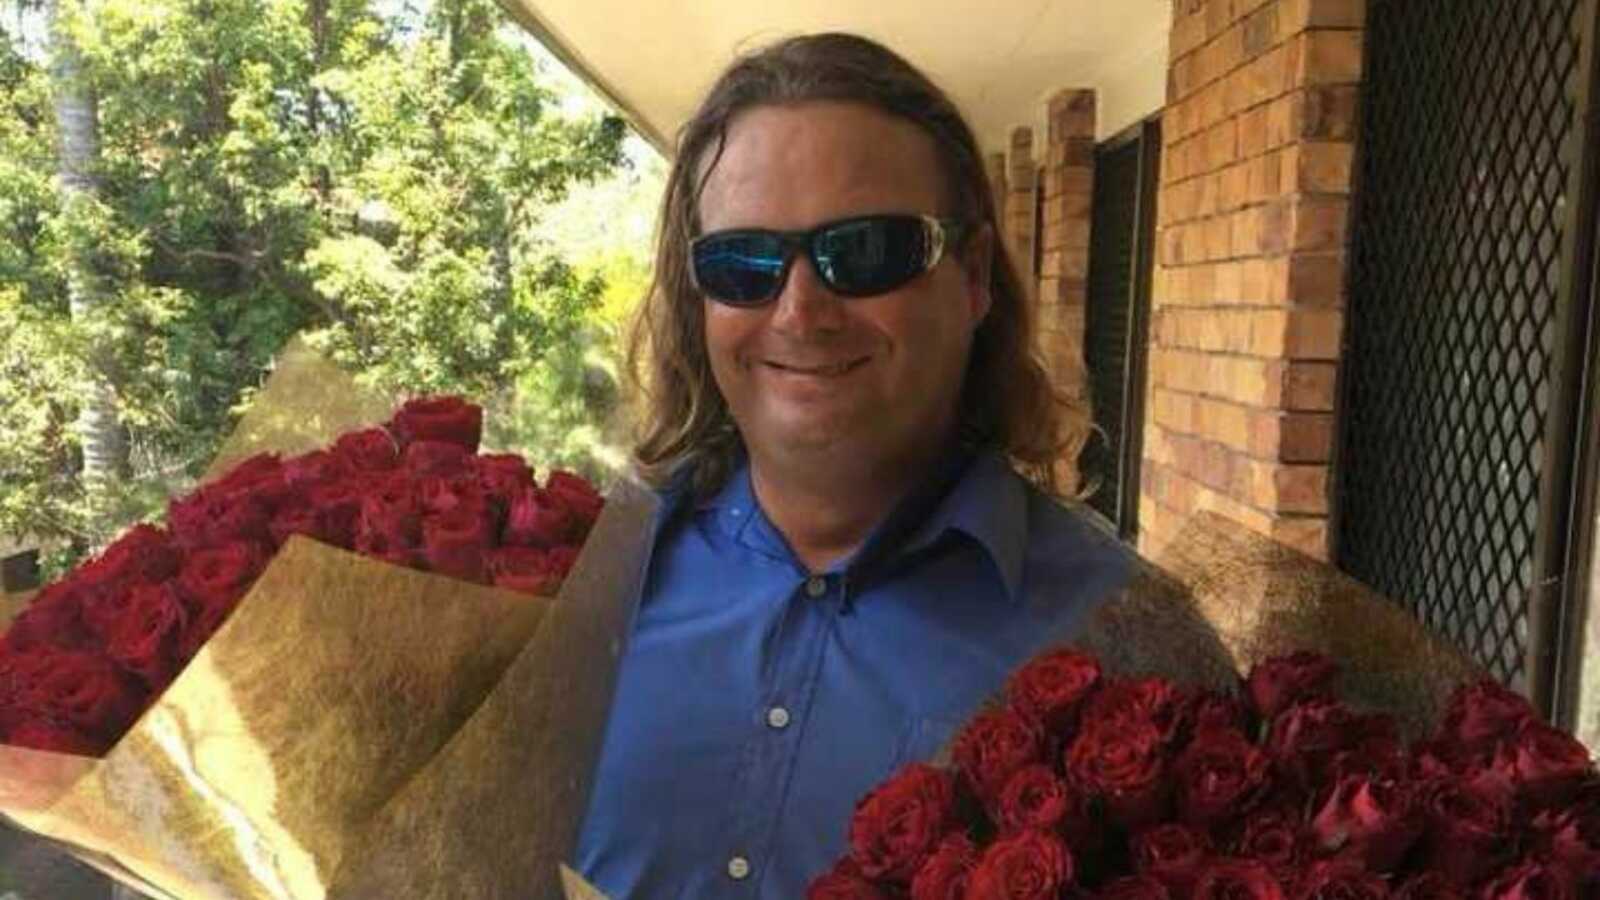 Homeless man holding bouquets of roses